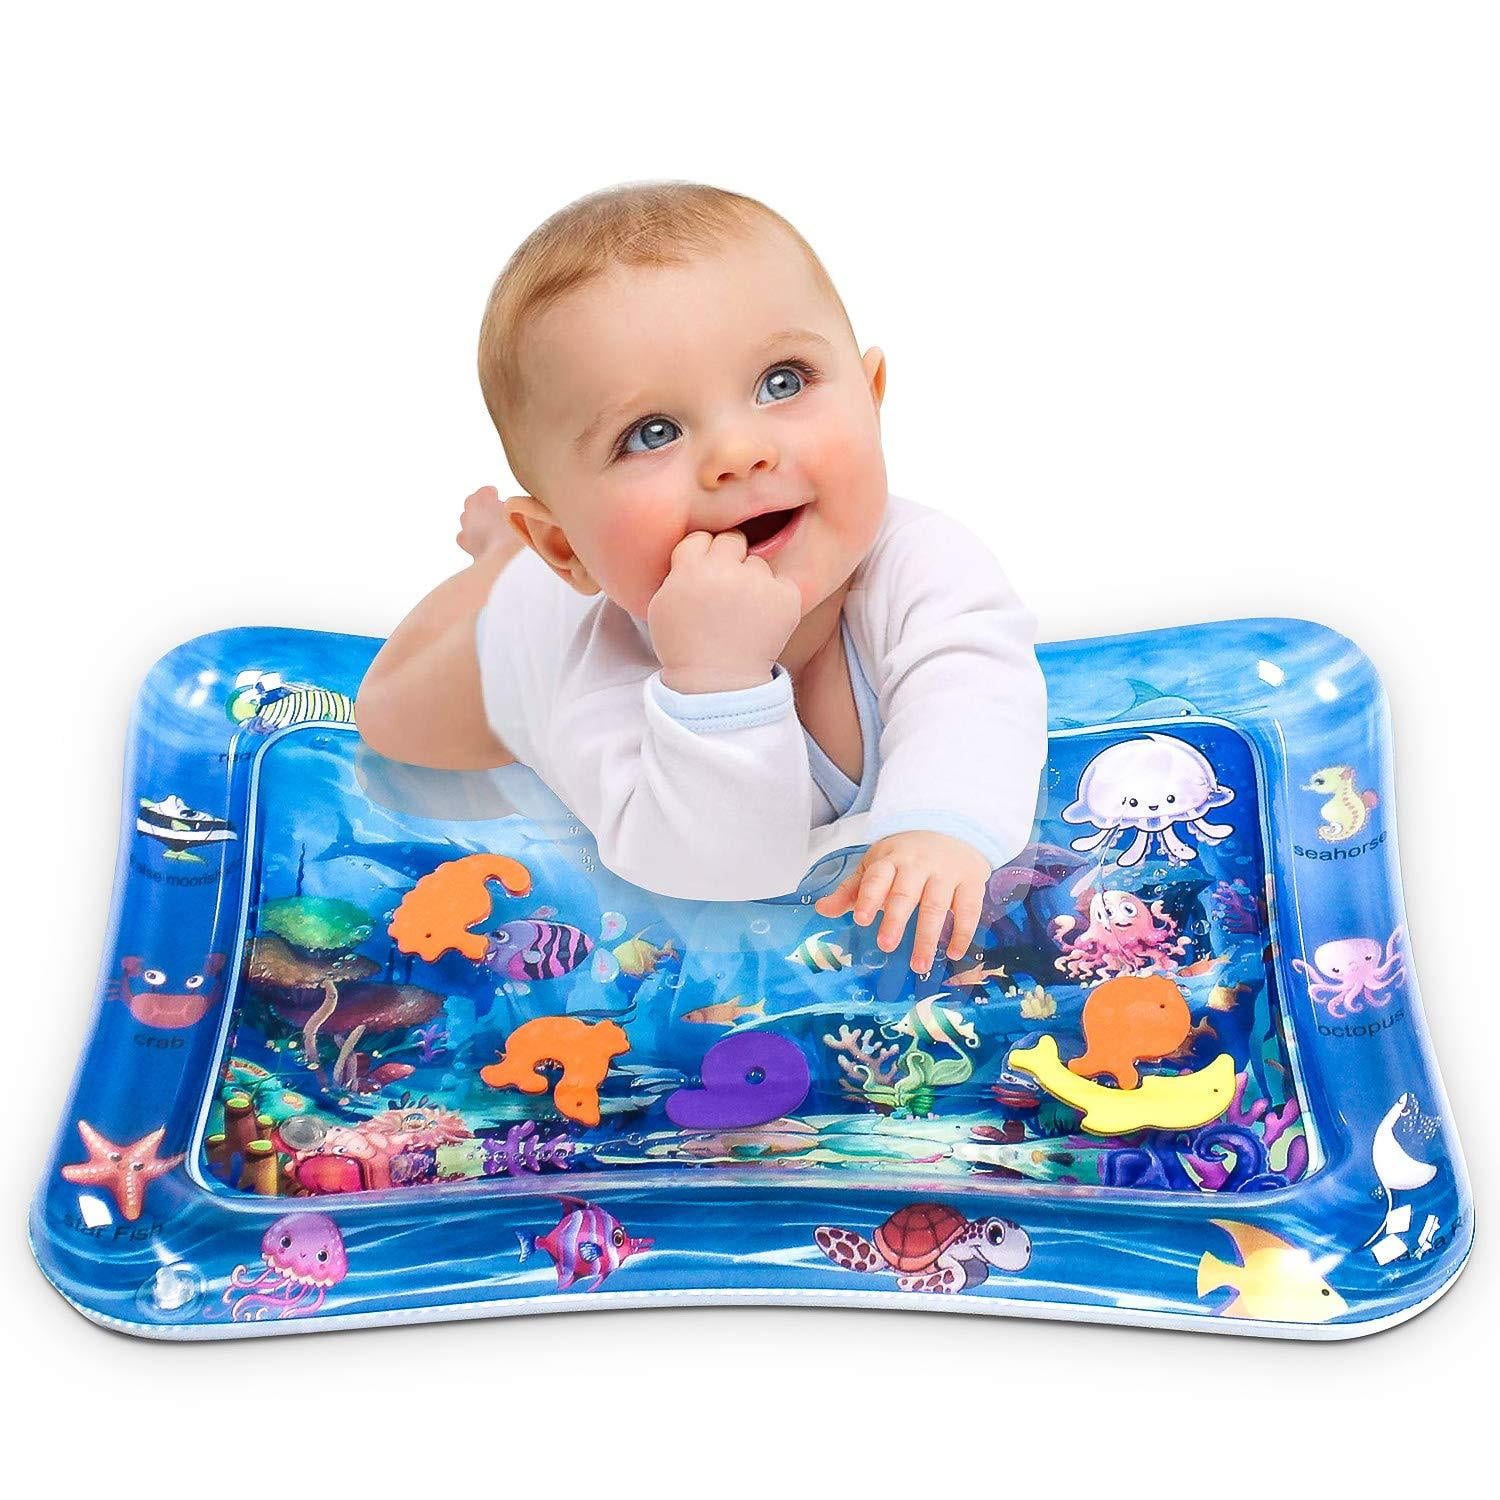 Inflatable Water Play Mat Infants Fun Tummy Time Kids Baby Play Activity Center 